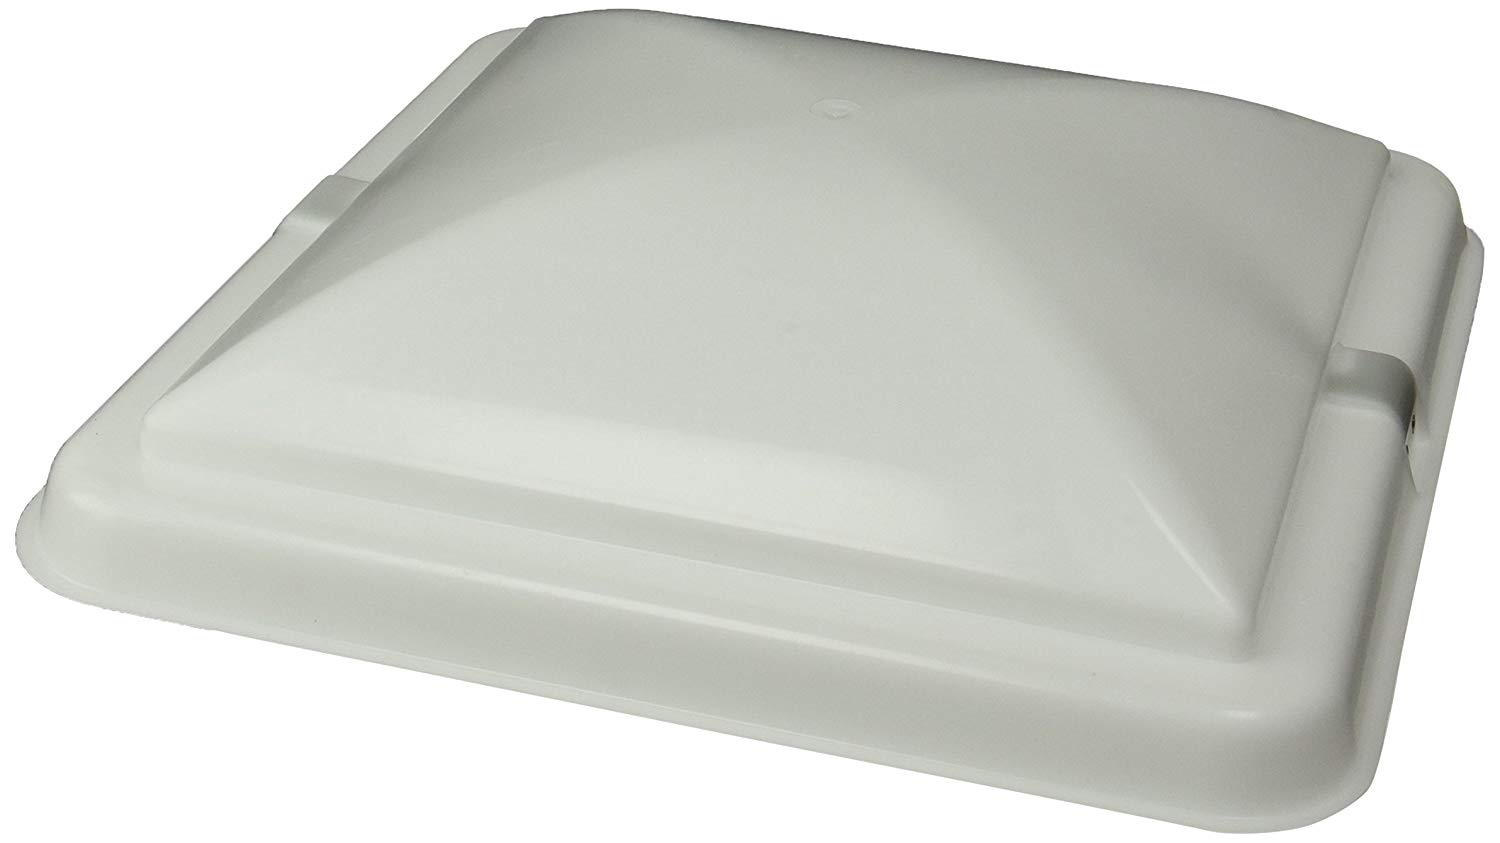 Ventline By Dexter BVO554-01 White Rounded Shaped RV Roof Vent Cover.